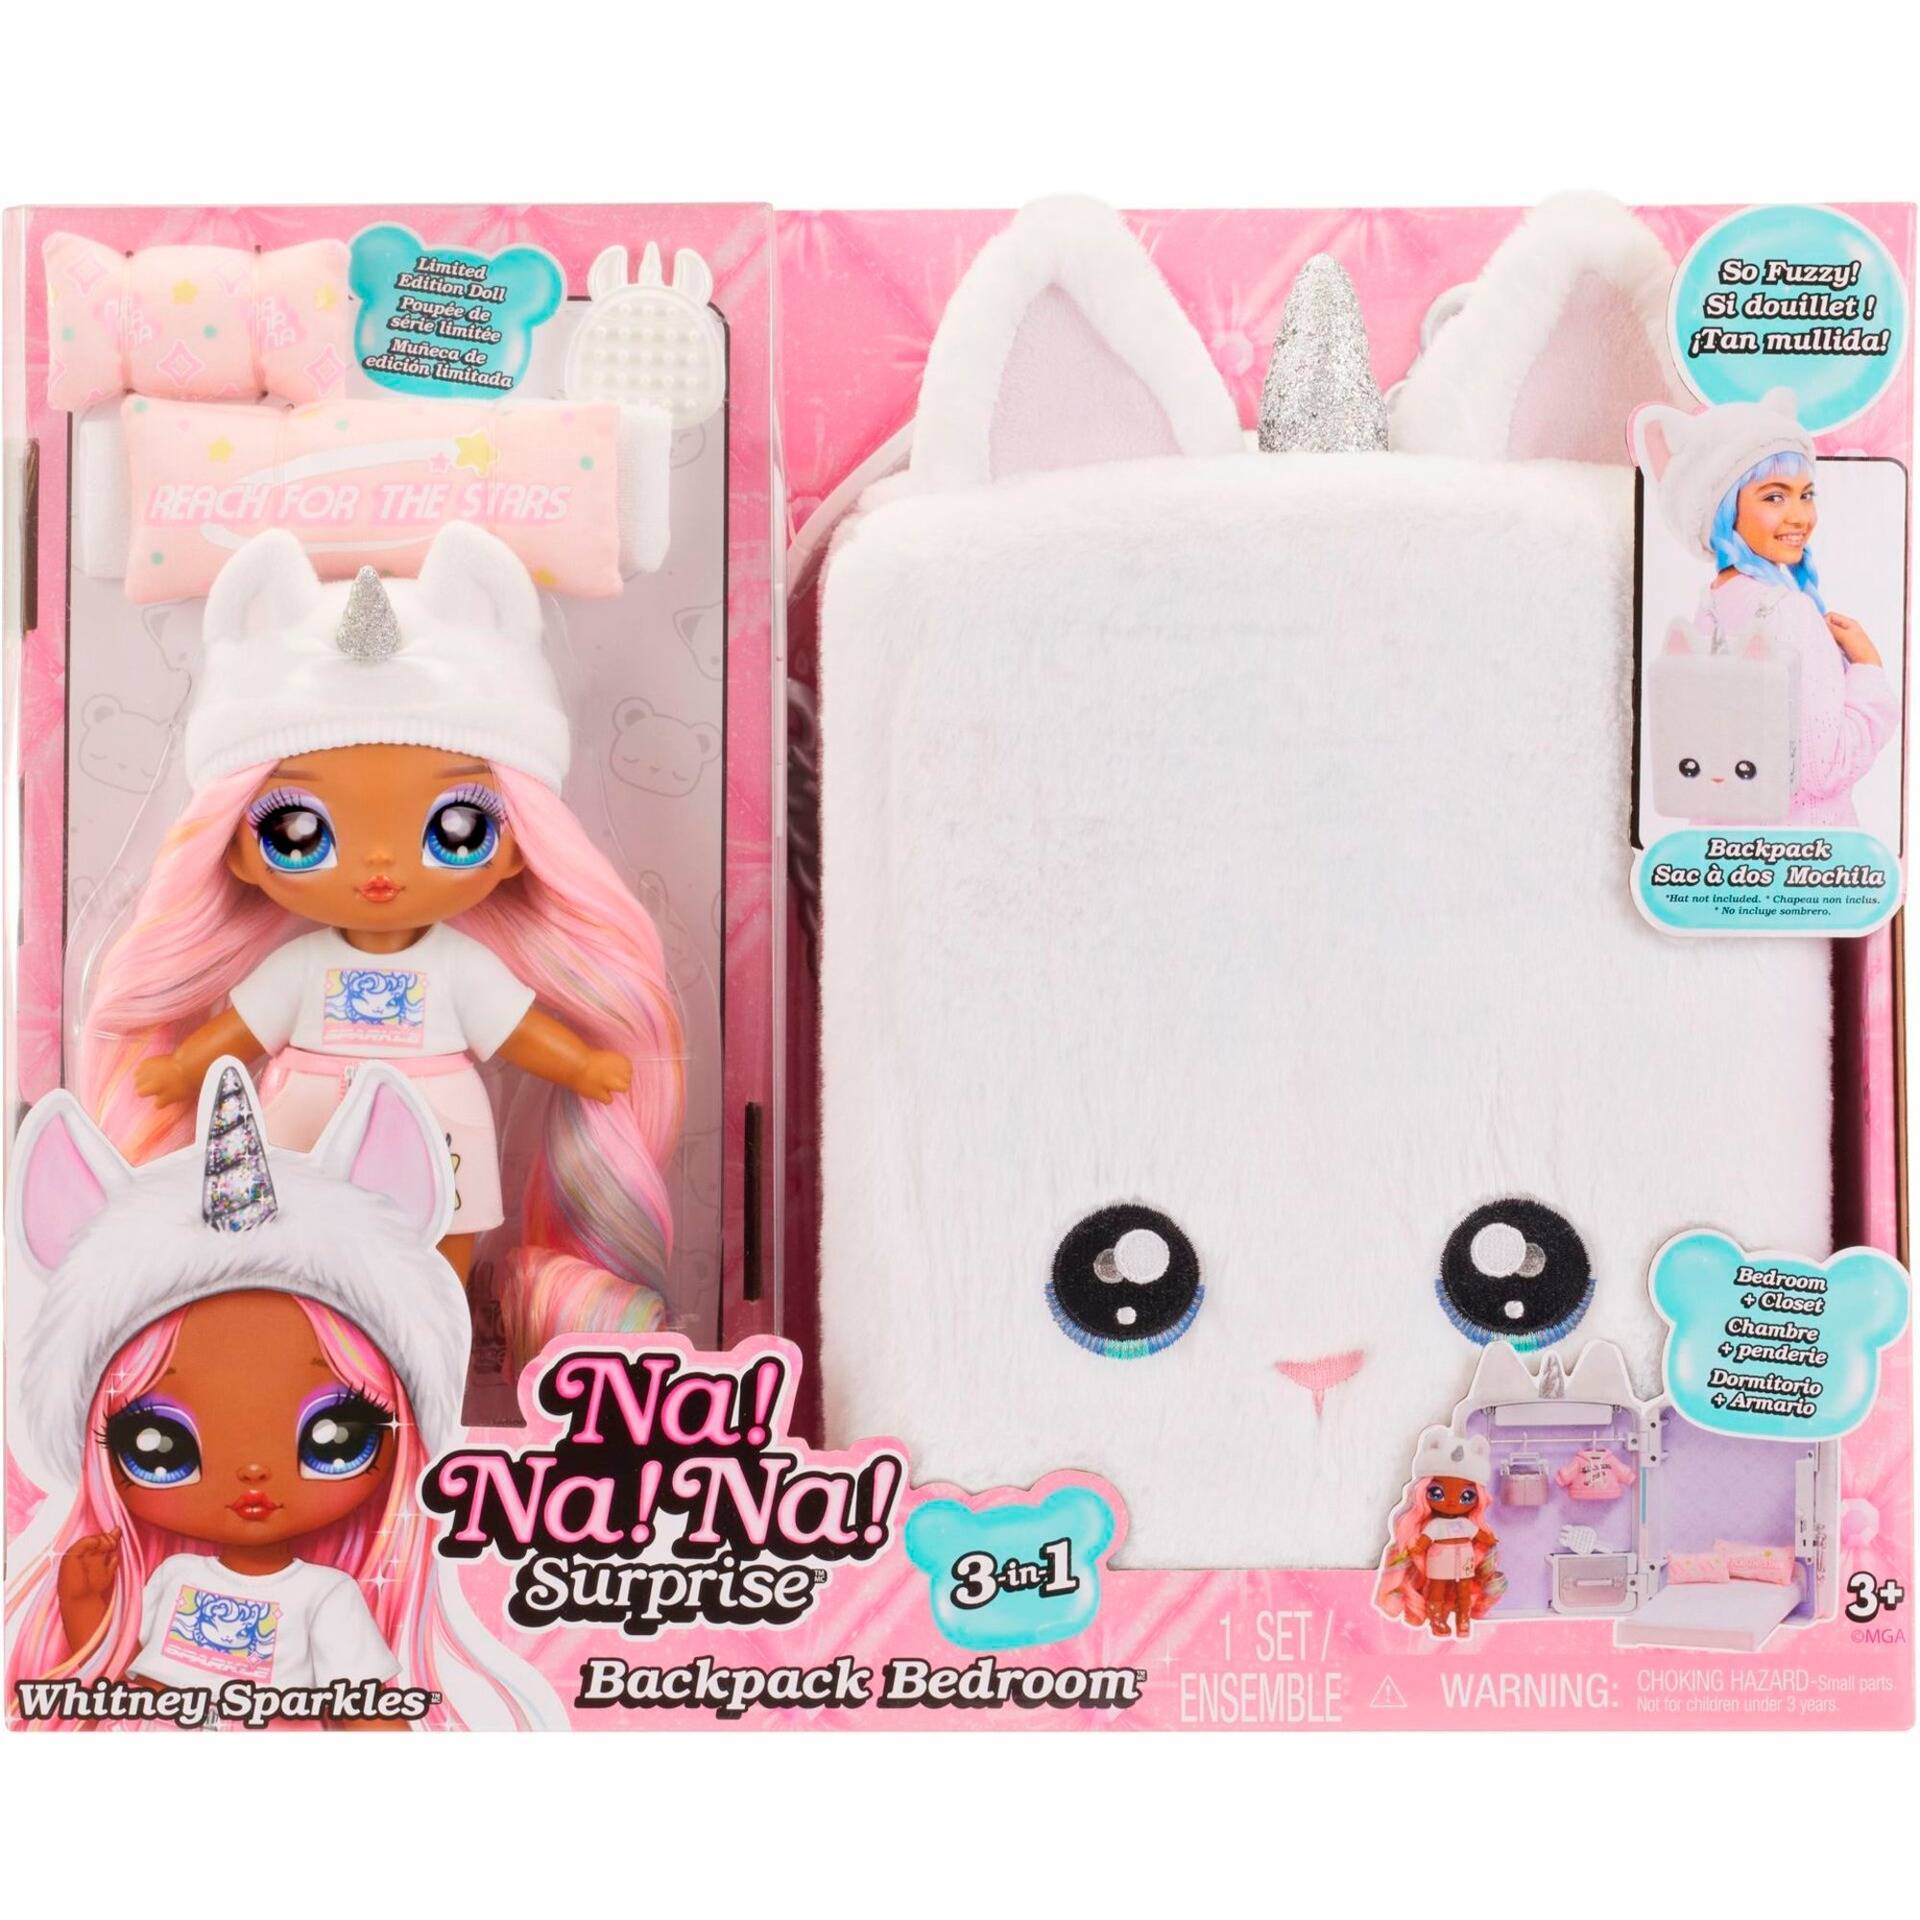 Na! Na! Na! Surprise 3-in-1 Backpack Bedroom Unicorn Whitney Sparkles, Puppe von MGA Entertainment